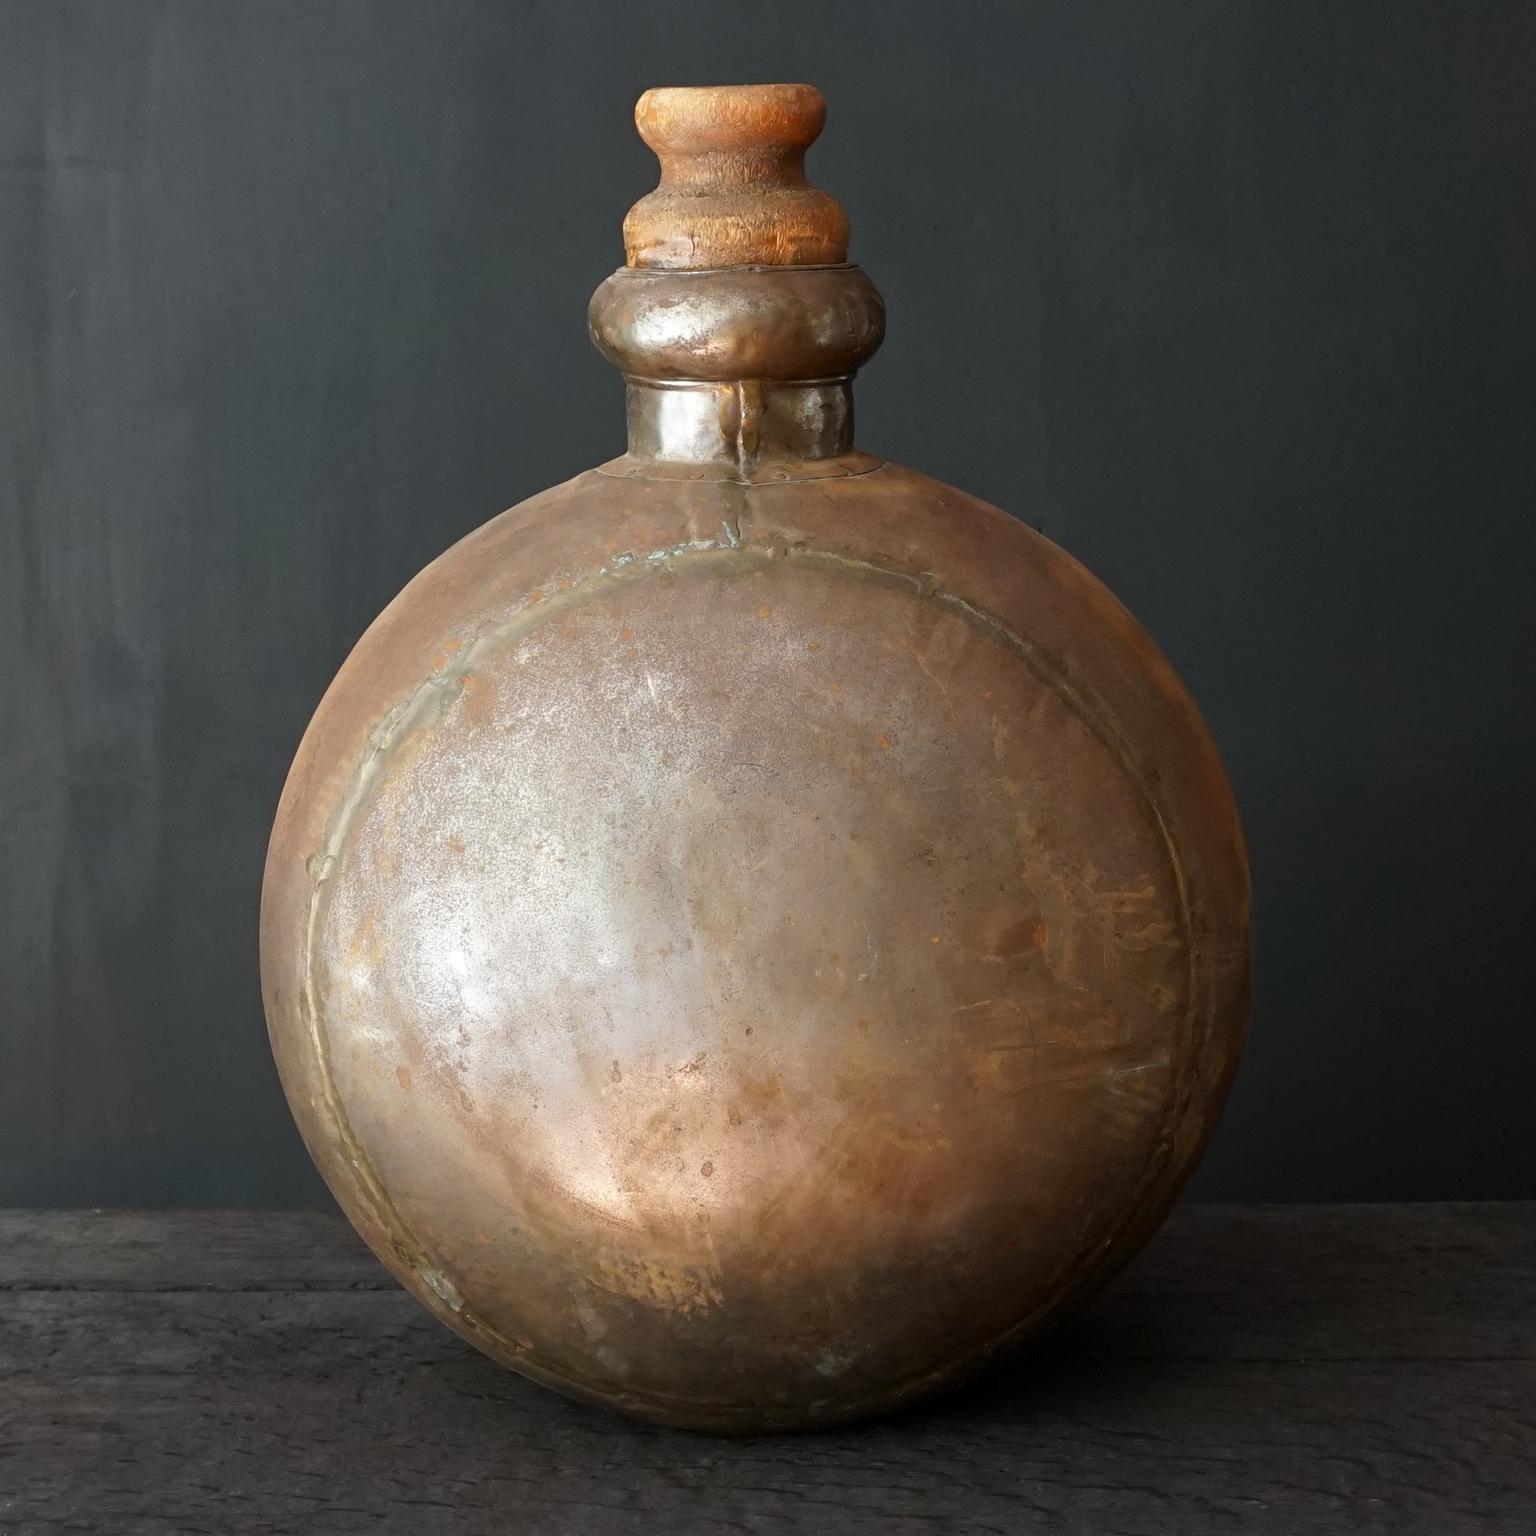 Beautiful decorative large vintage Indian craftsmanship hand-hammered metal water jug with wooden cork from the mid 20th century. This metal bulbous iron bottle has a great 'antique' finish due to age and use. 
Great for decoration in any kind of